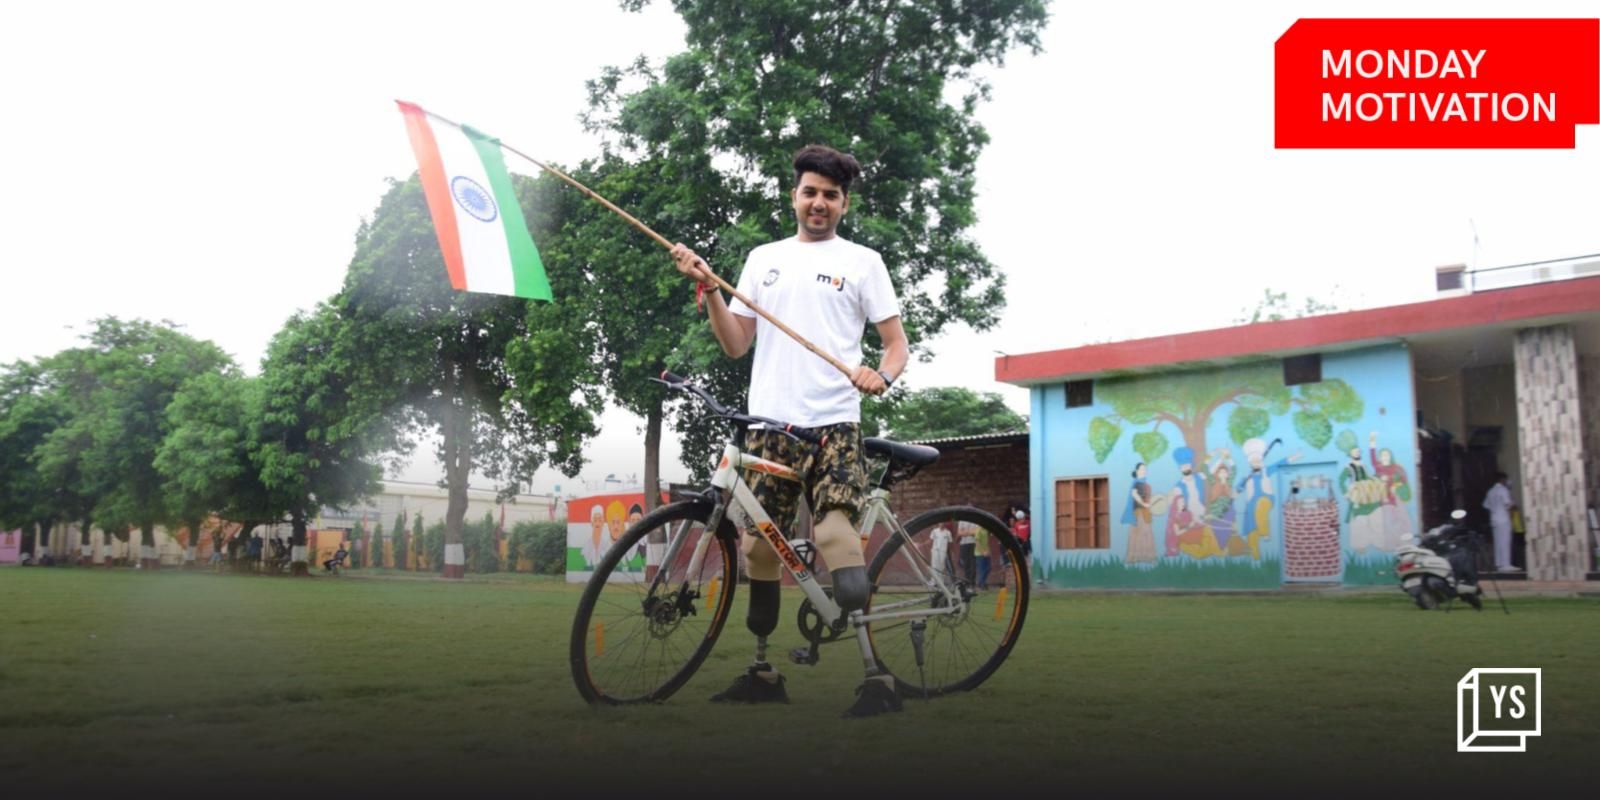 From losing his legs to setting a world record in cycling, the inspiring story of Ablu Rajesh Kumar 